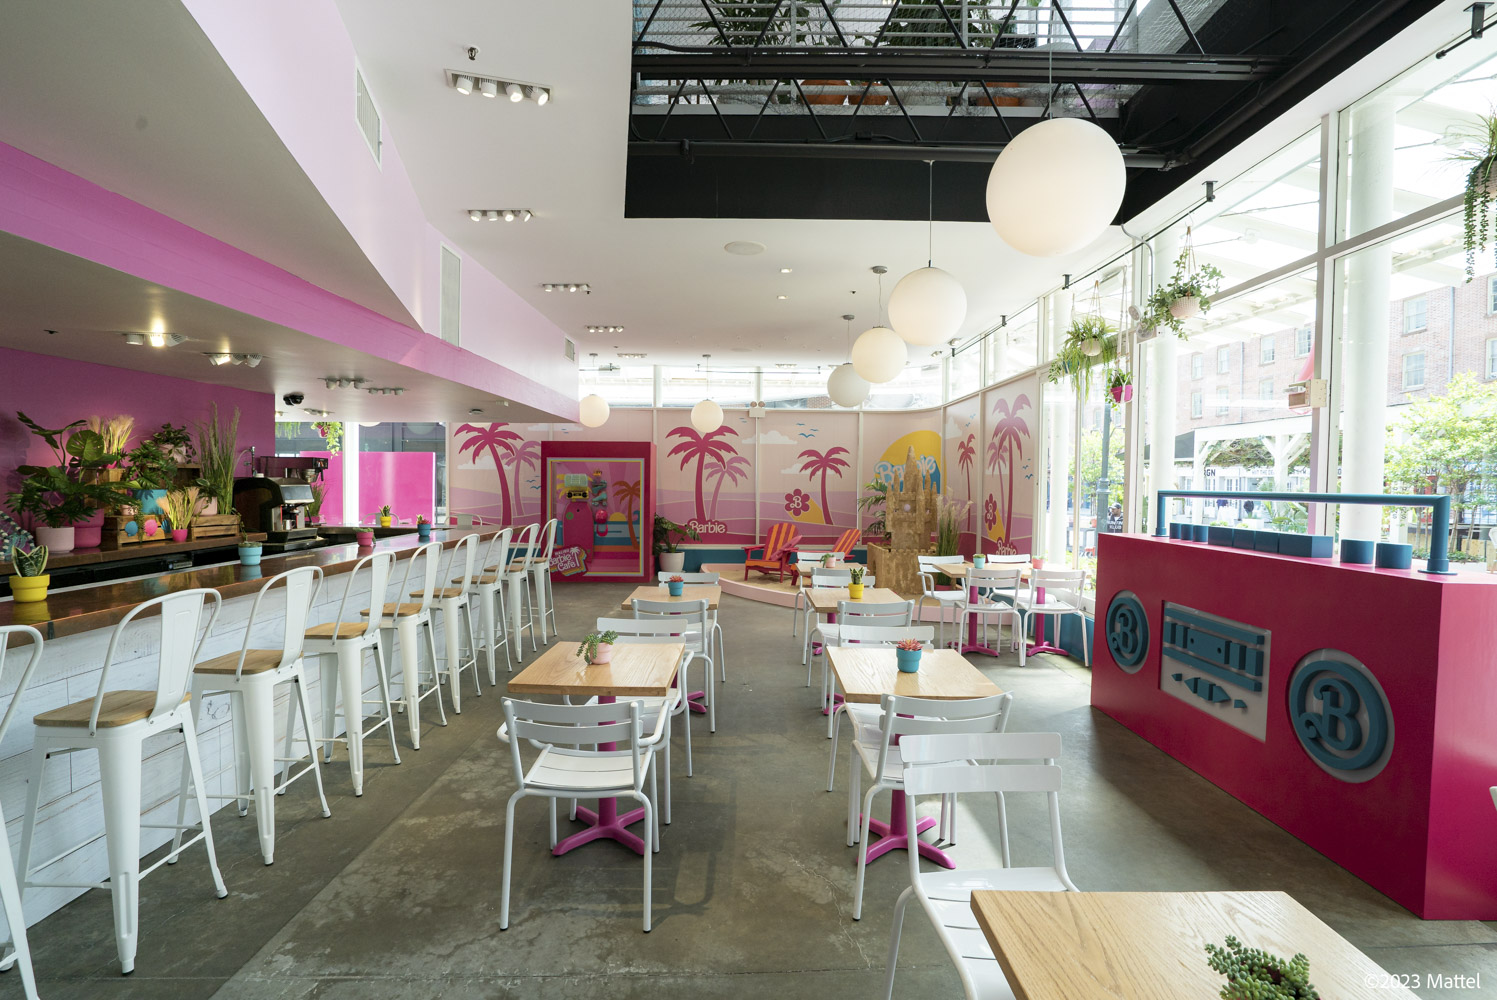 NYC's Barbie Cafe Is a Surreal and Sugary, Vintage Barbiecore Experience -  Bloomberg